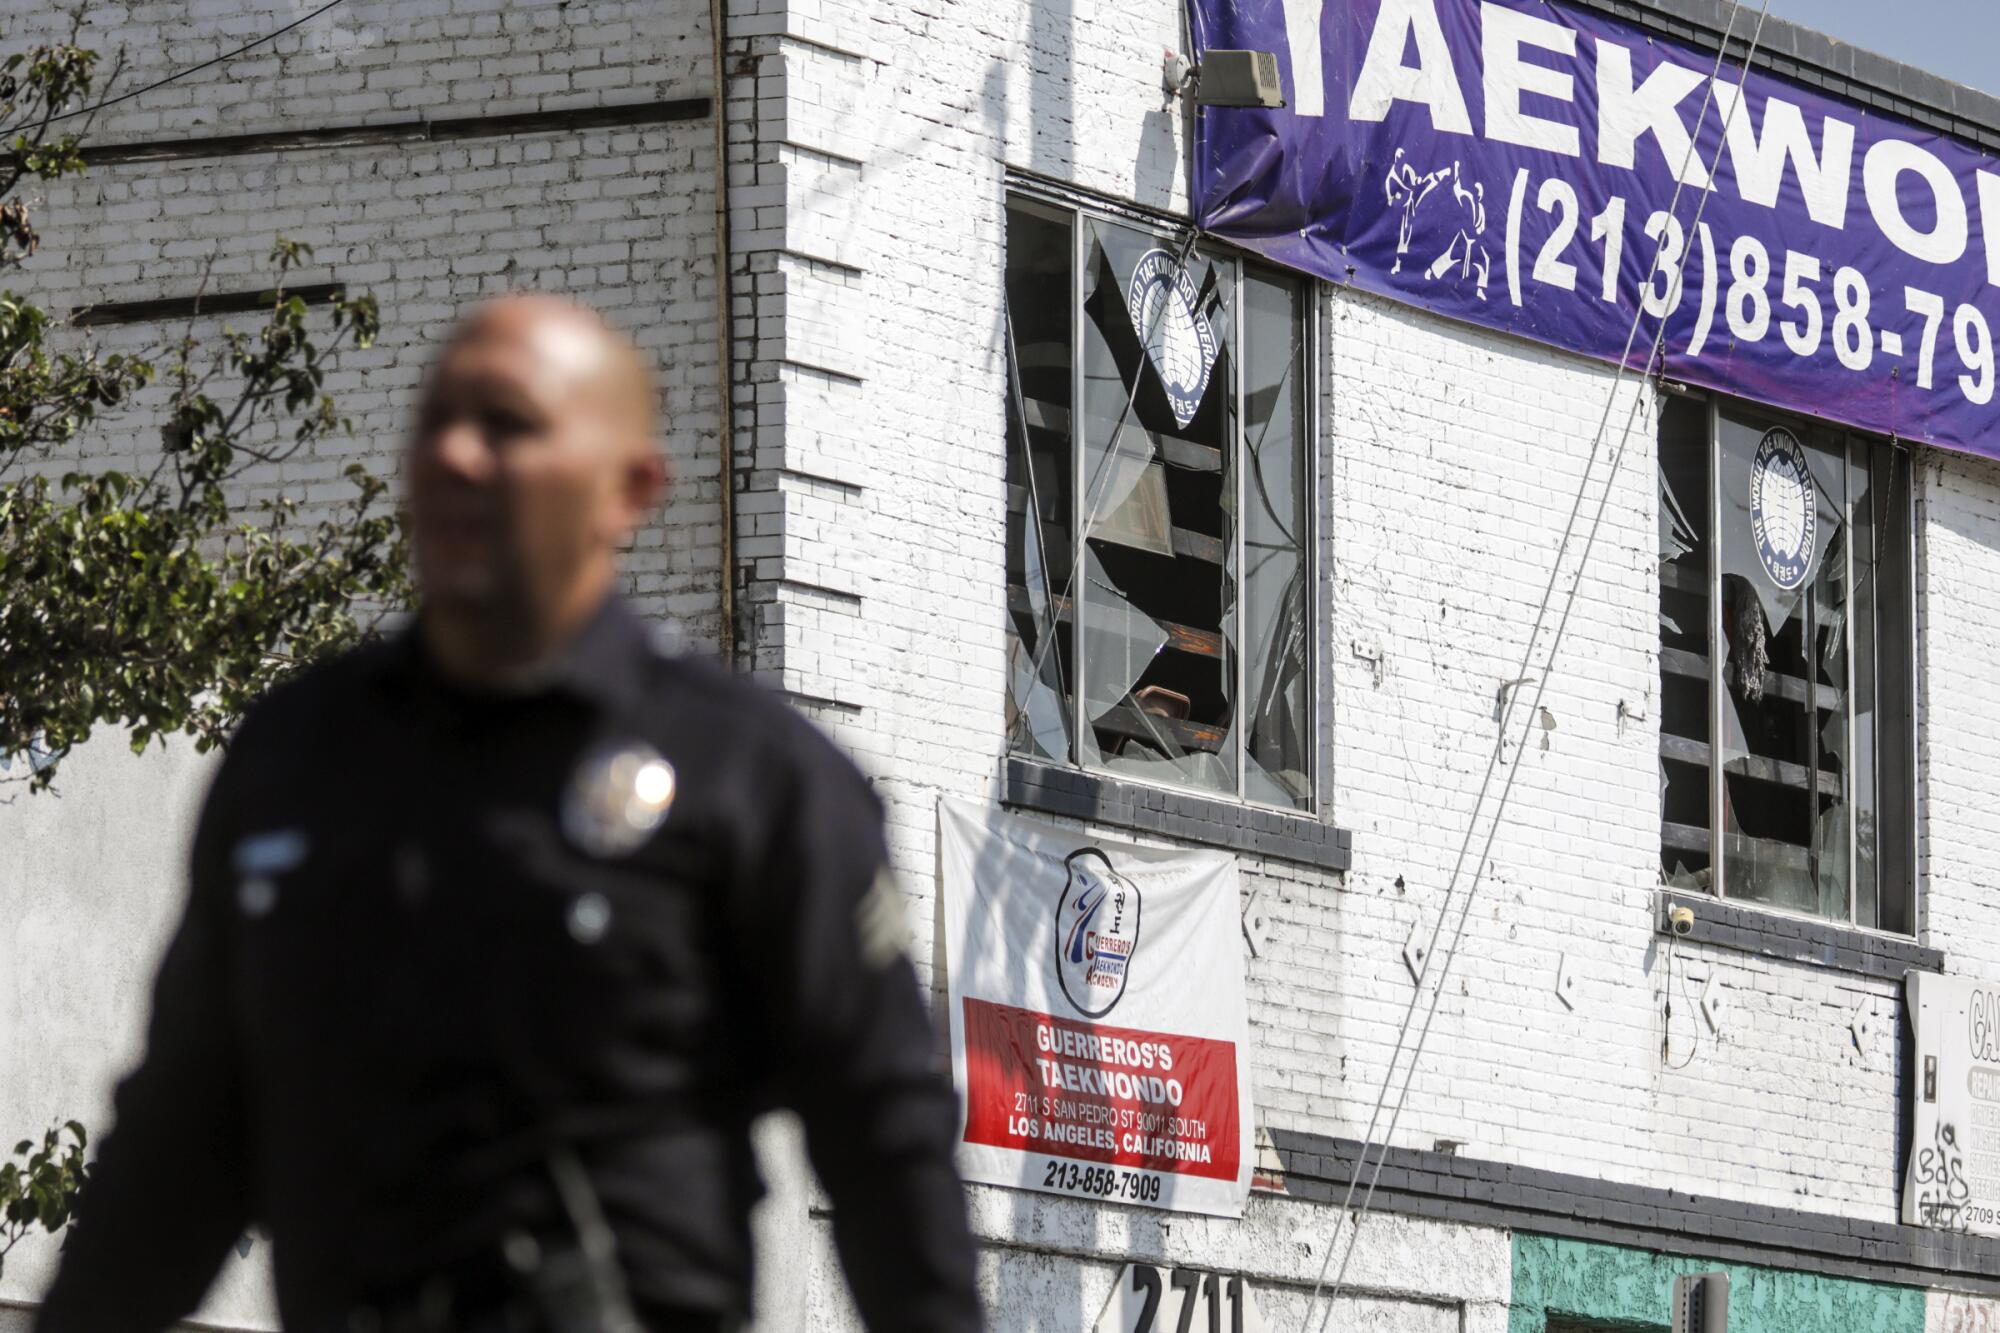 A police officer is seen in front of a building with shattered windows.